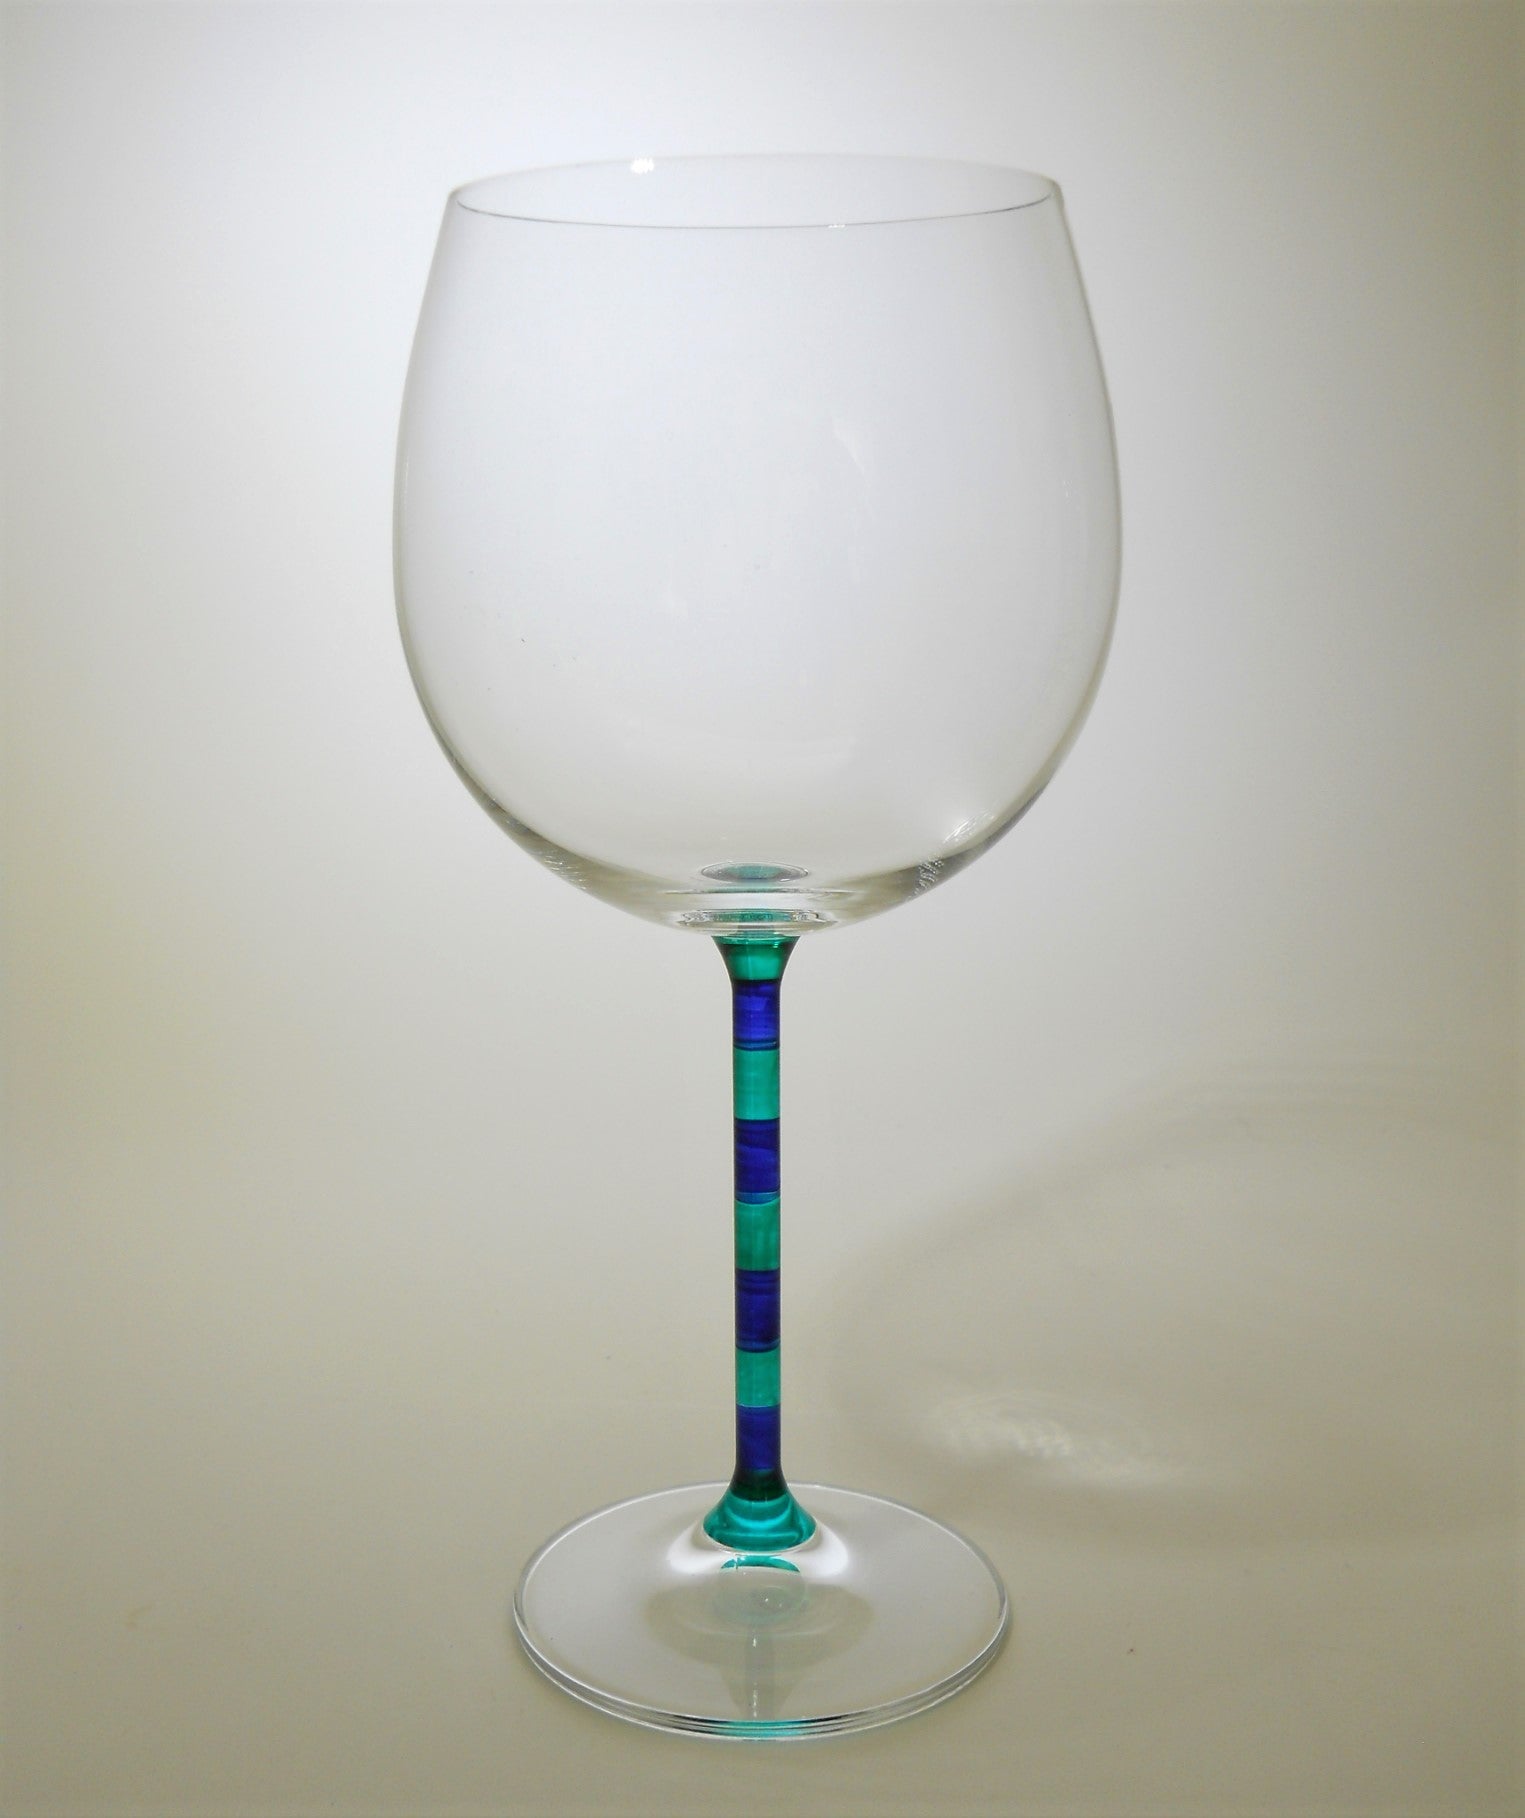 Wine Glasses With Bunch of Grapes Figure, Balloon Glass, Balloon